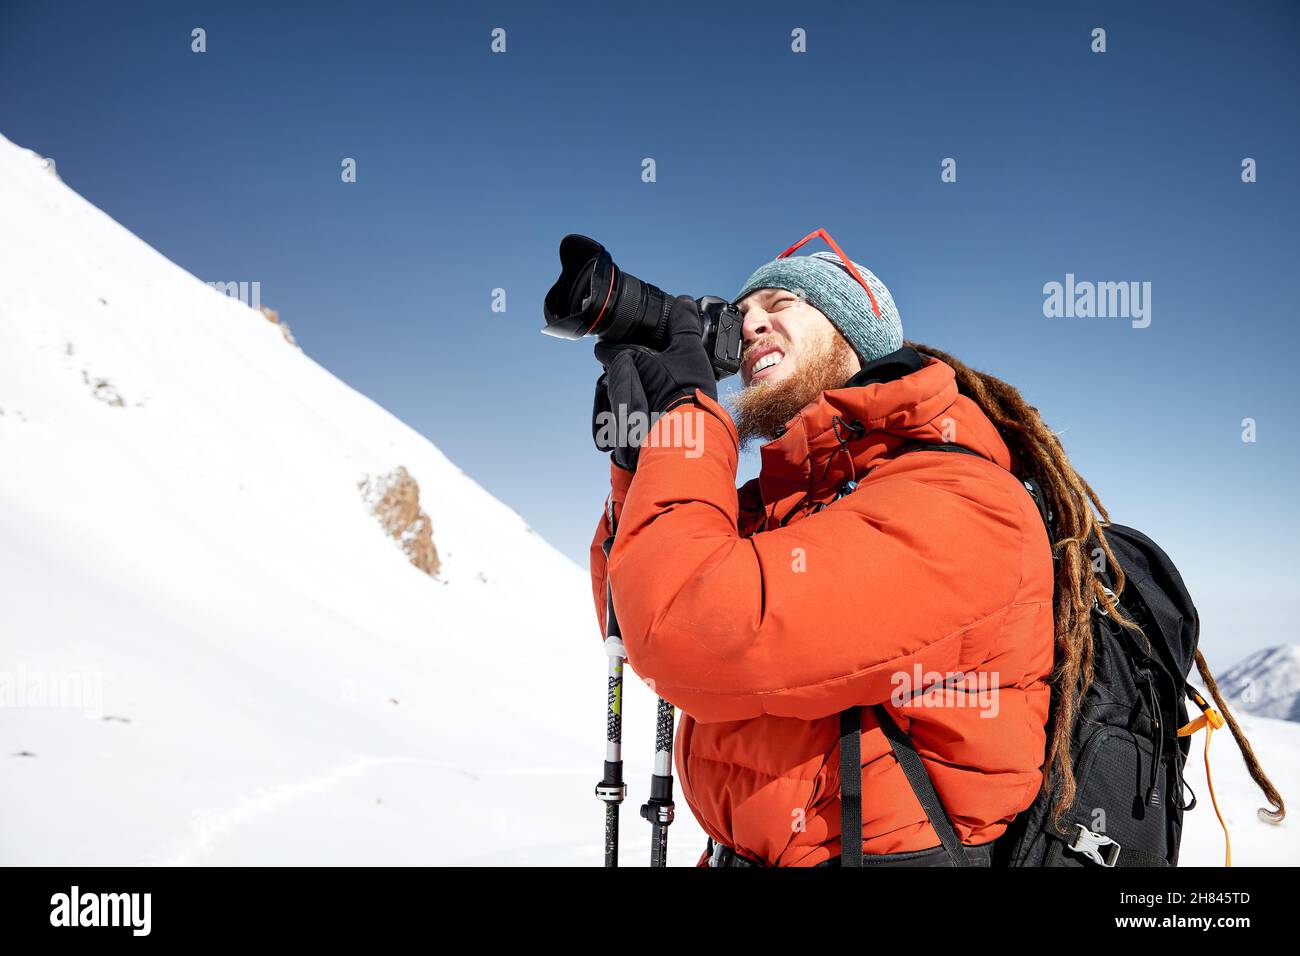 Photographer with camera taking a picture in red jacket at the snow mountains against blue sky in Almaty, Kazakhstan Stock Photo